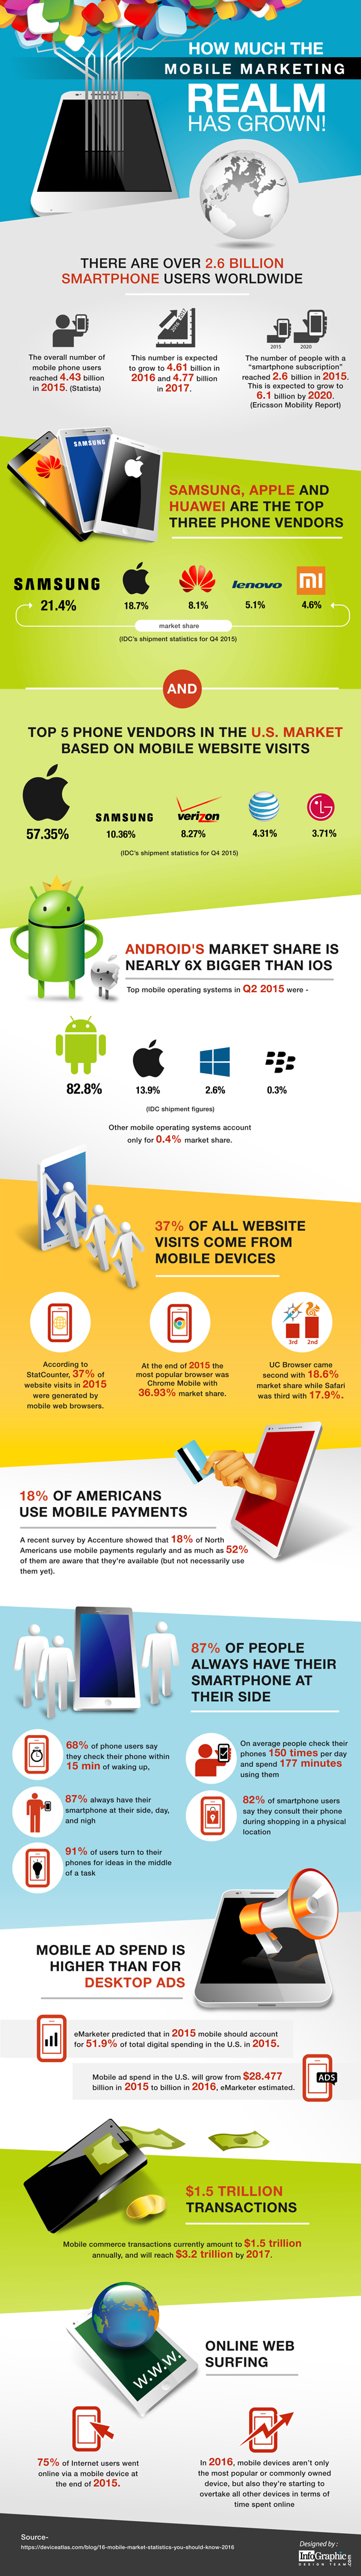 A Visual Look at the Massive Growth of Mobile Marketing [Infographic]